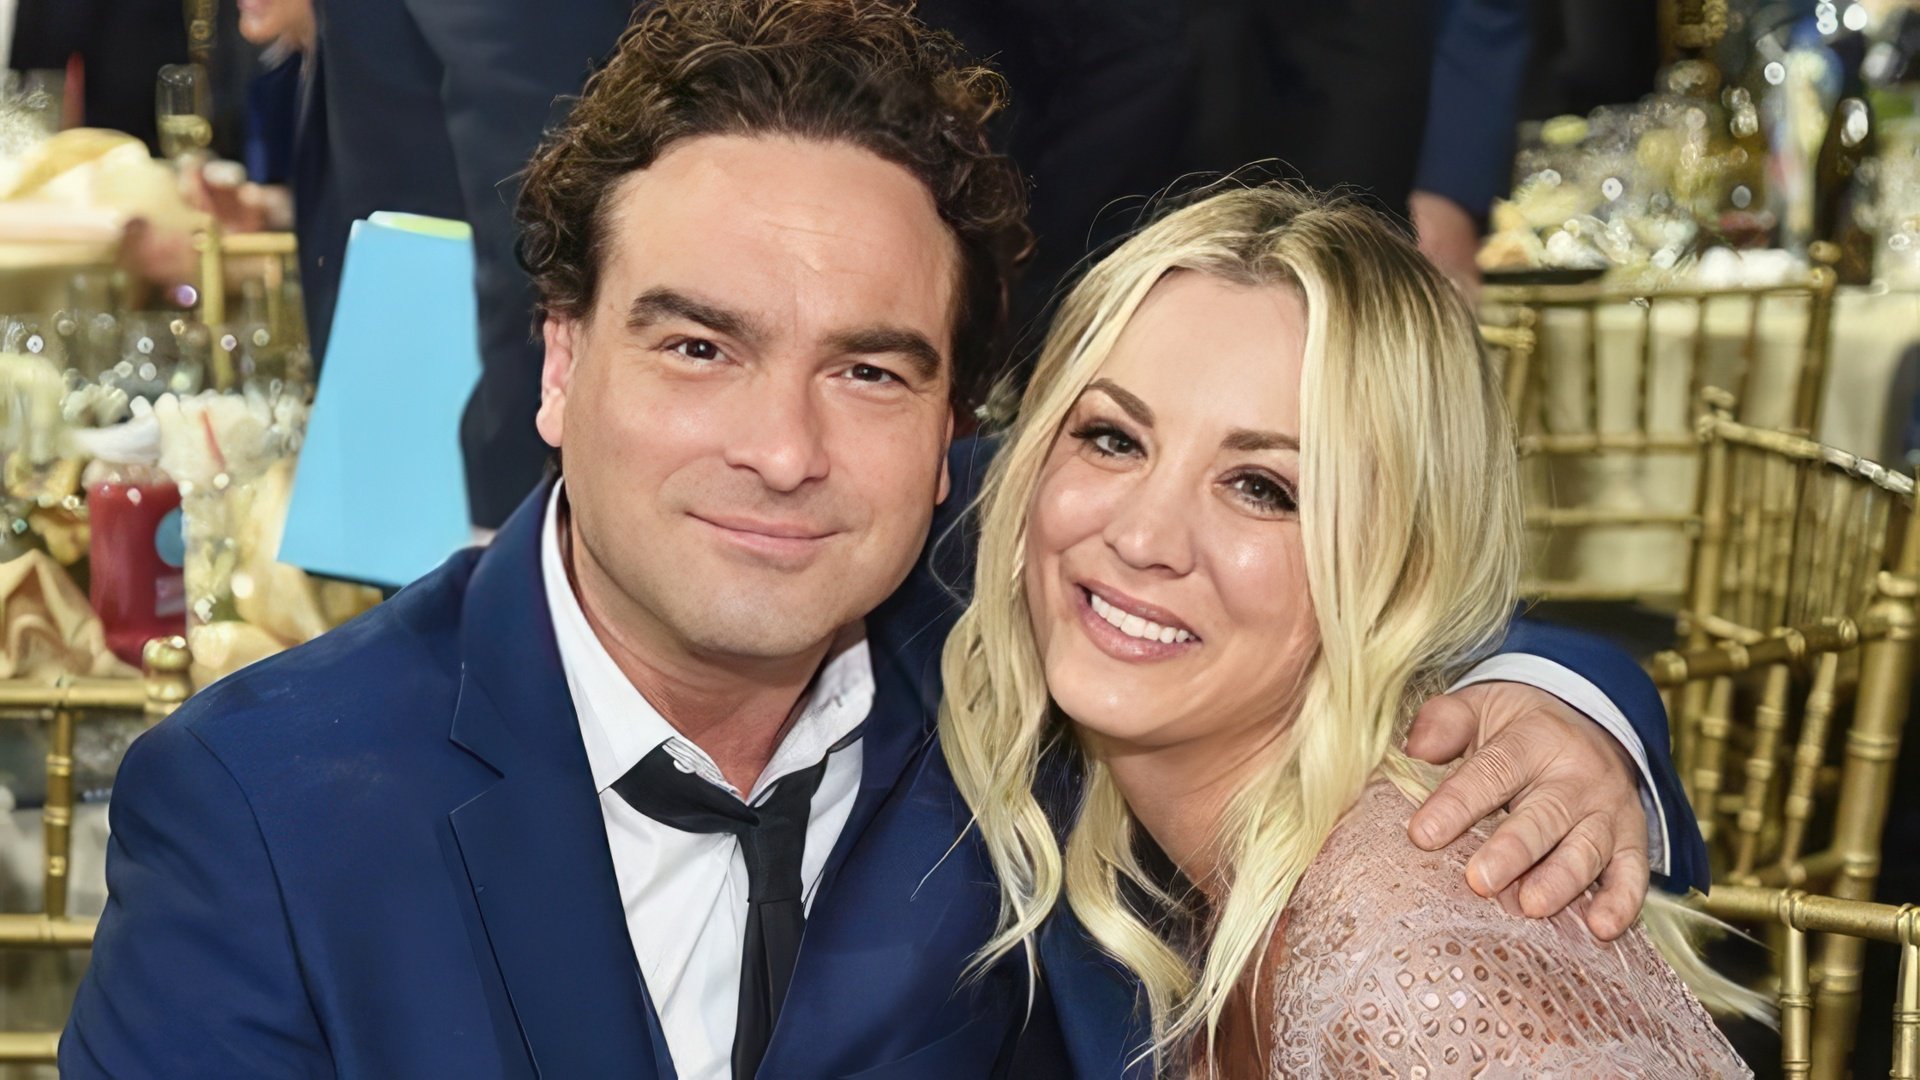 Johnny Galecki dated Kaley Cuoco, who played Penny